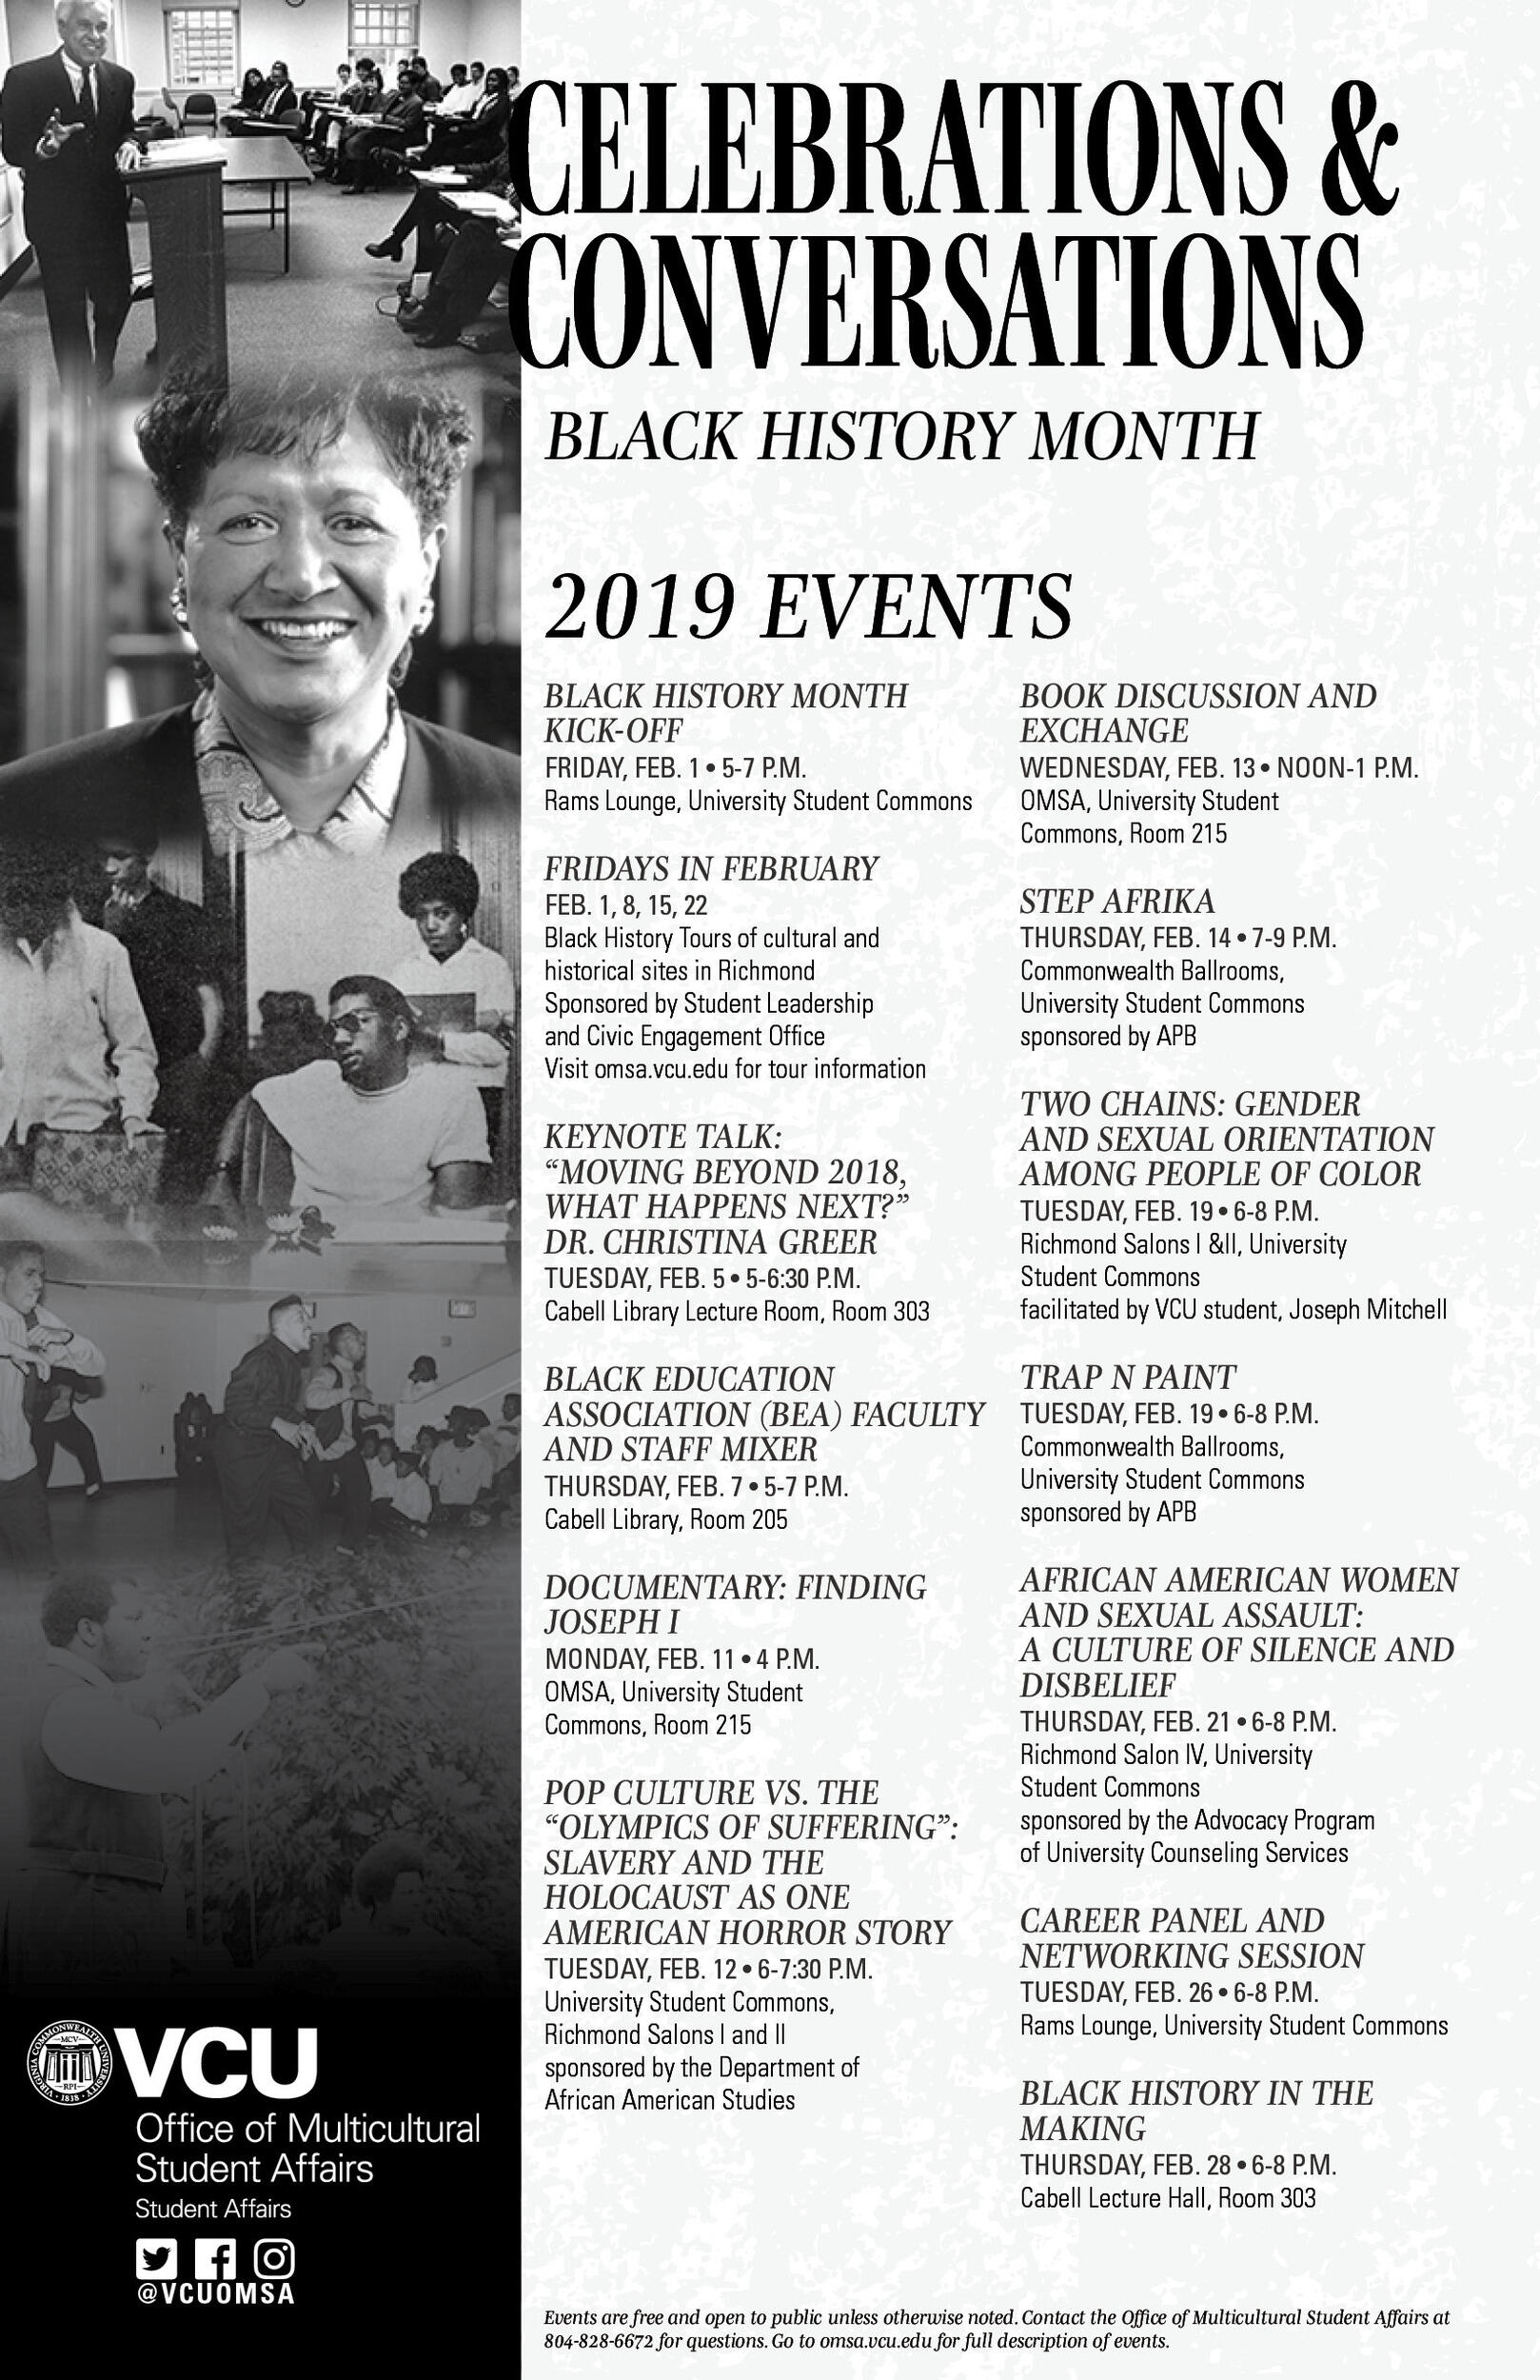 Poster of 2019 Black History Month events at VCU